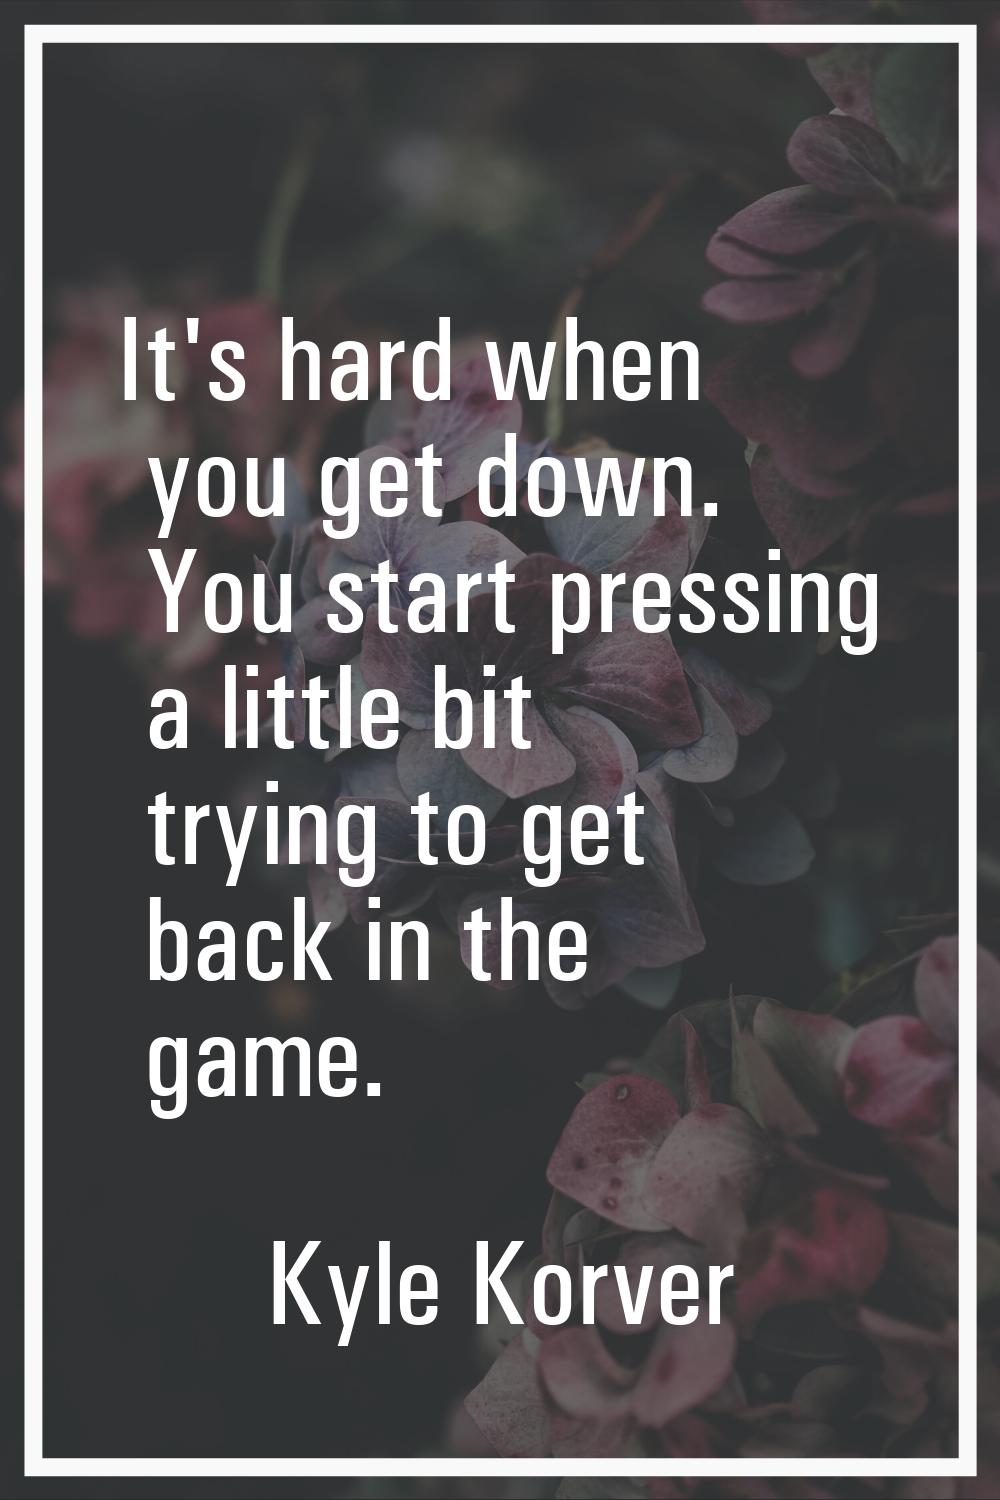 It's hard when you get down. You start pressing a little bit trying to get back in the game.